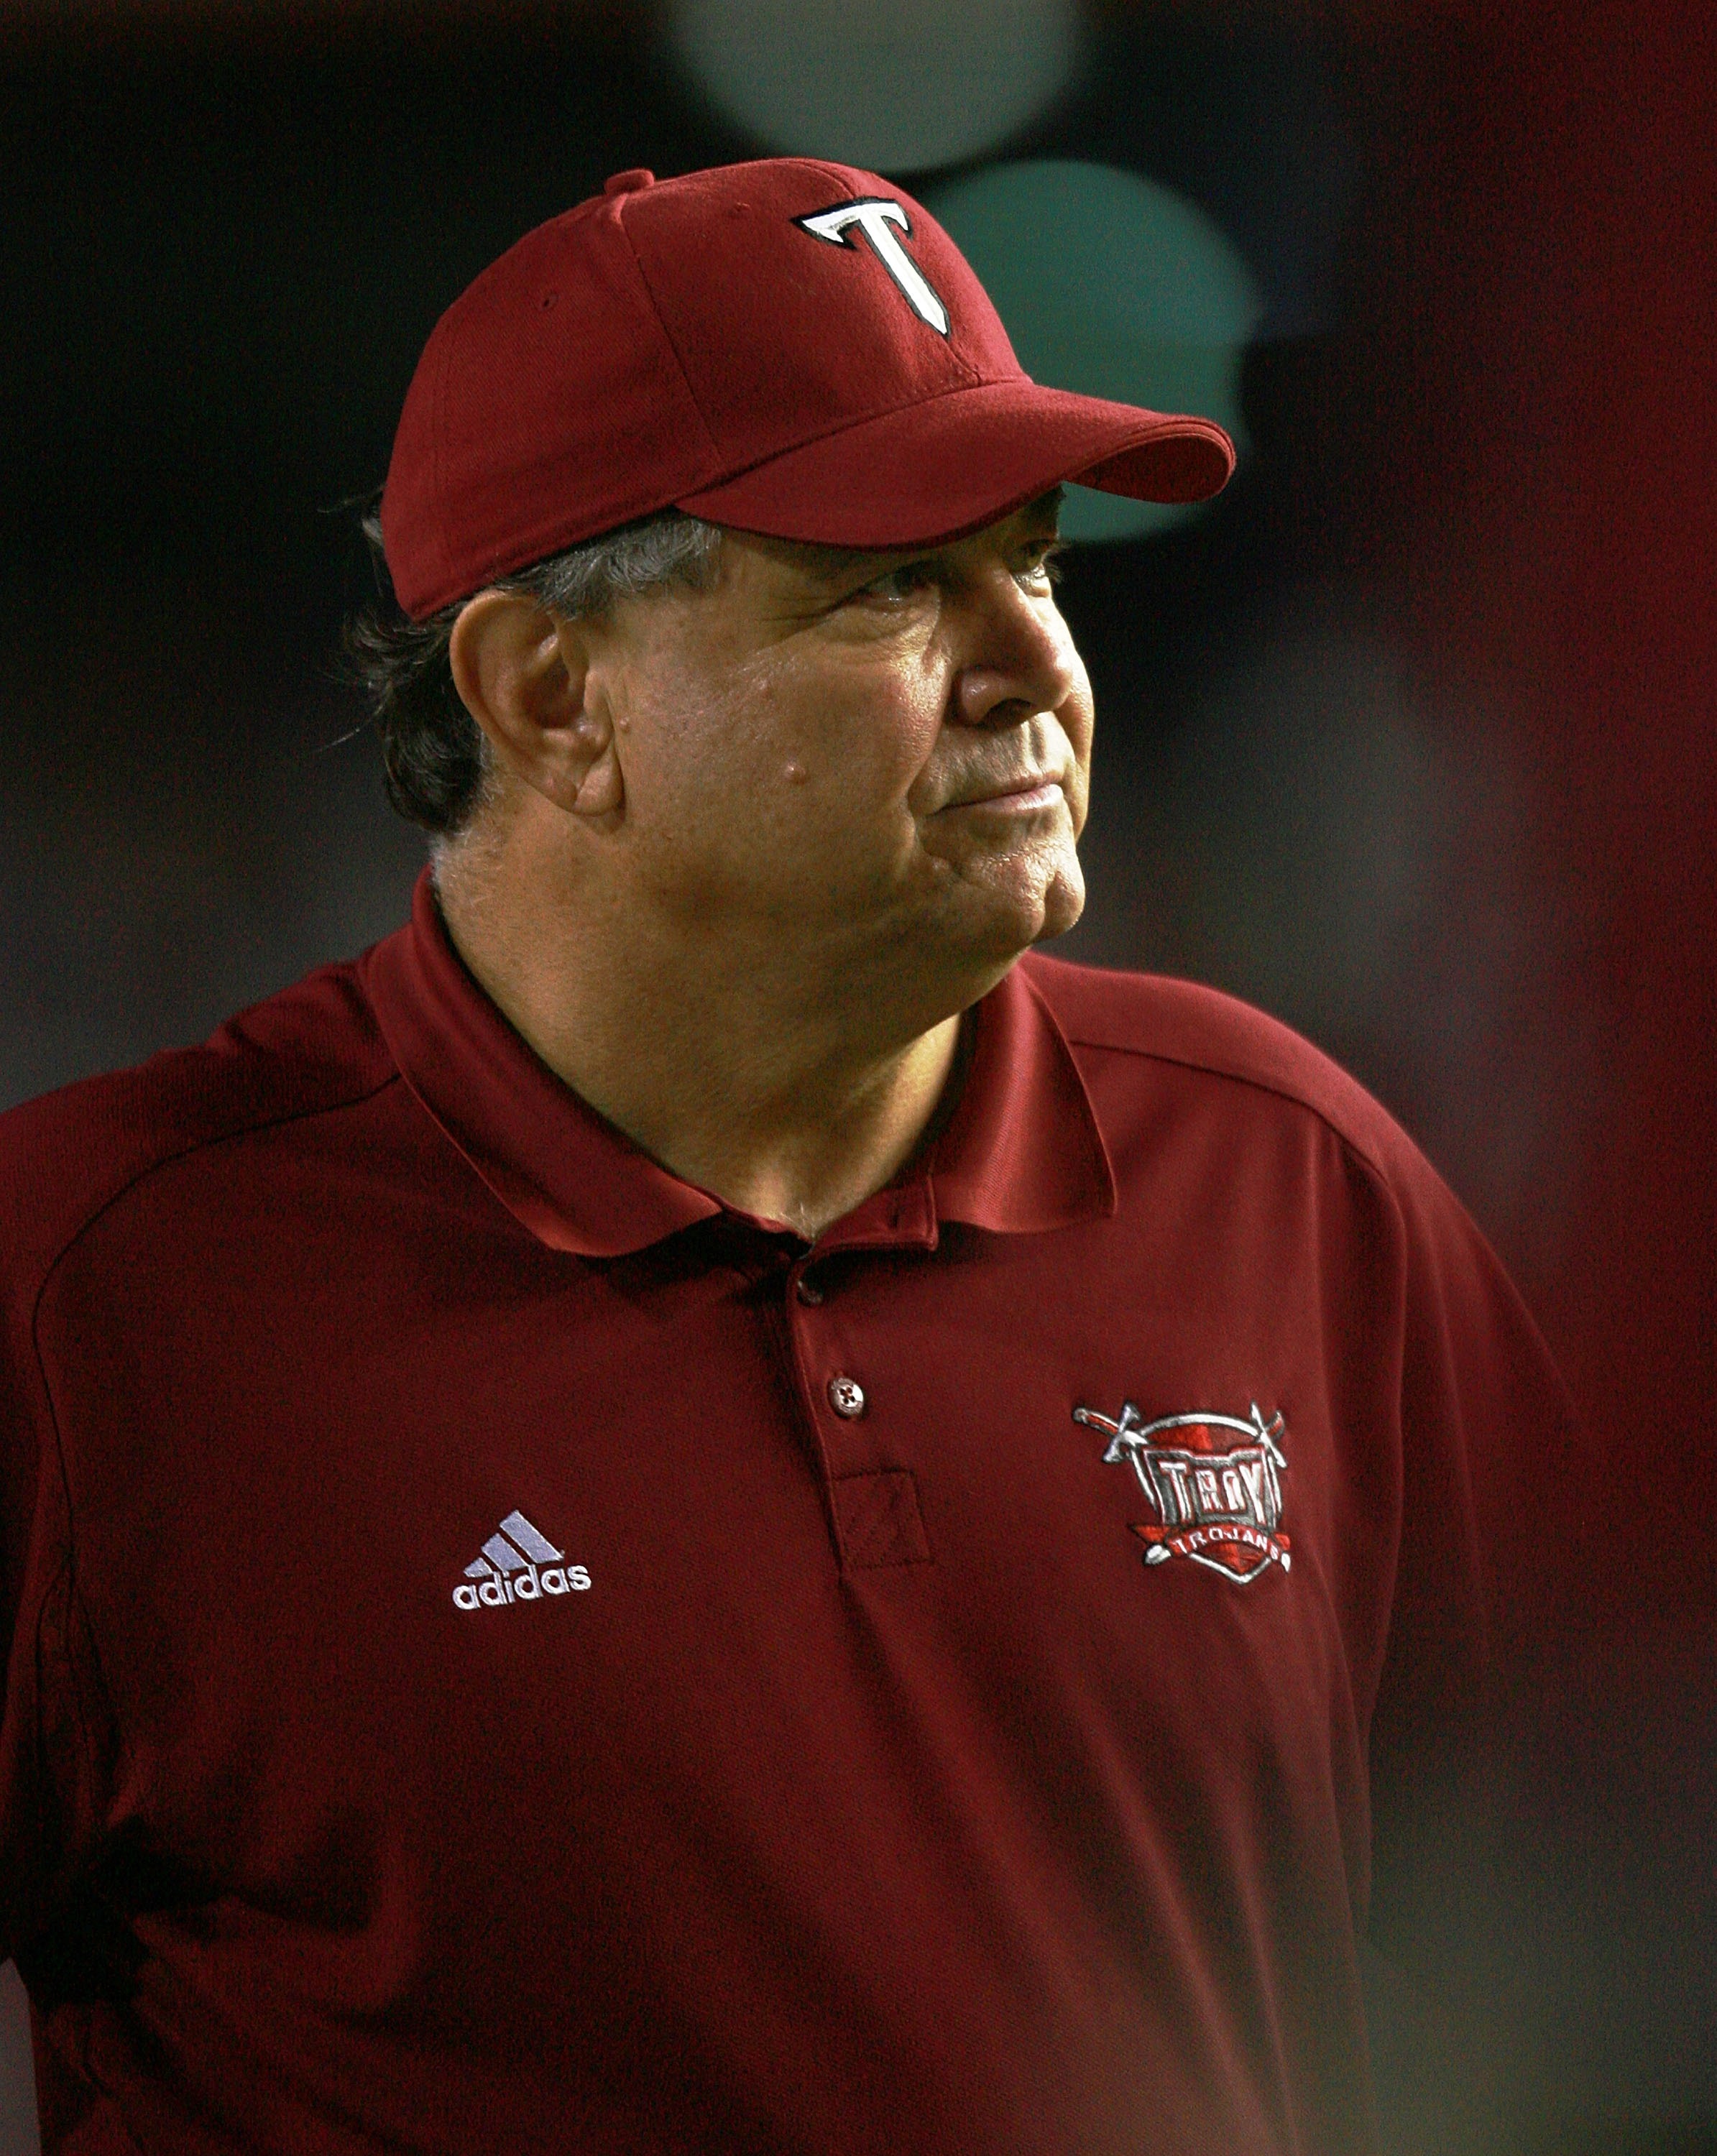 GAINESVILLE, FL - SEPTEMBER 08:  Head coach Larry Blakeney of the Troy Trojans watches his team take on the Florida Gators at Ben Hill Griffin Stadium on September 8, 2007 in Gainesville, Florida.  (Photo by Doug Benc/Getty Images)